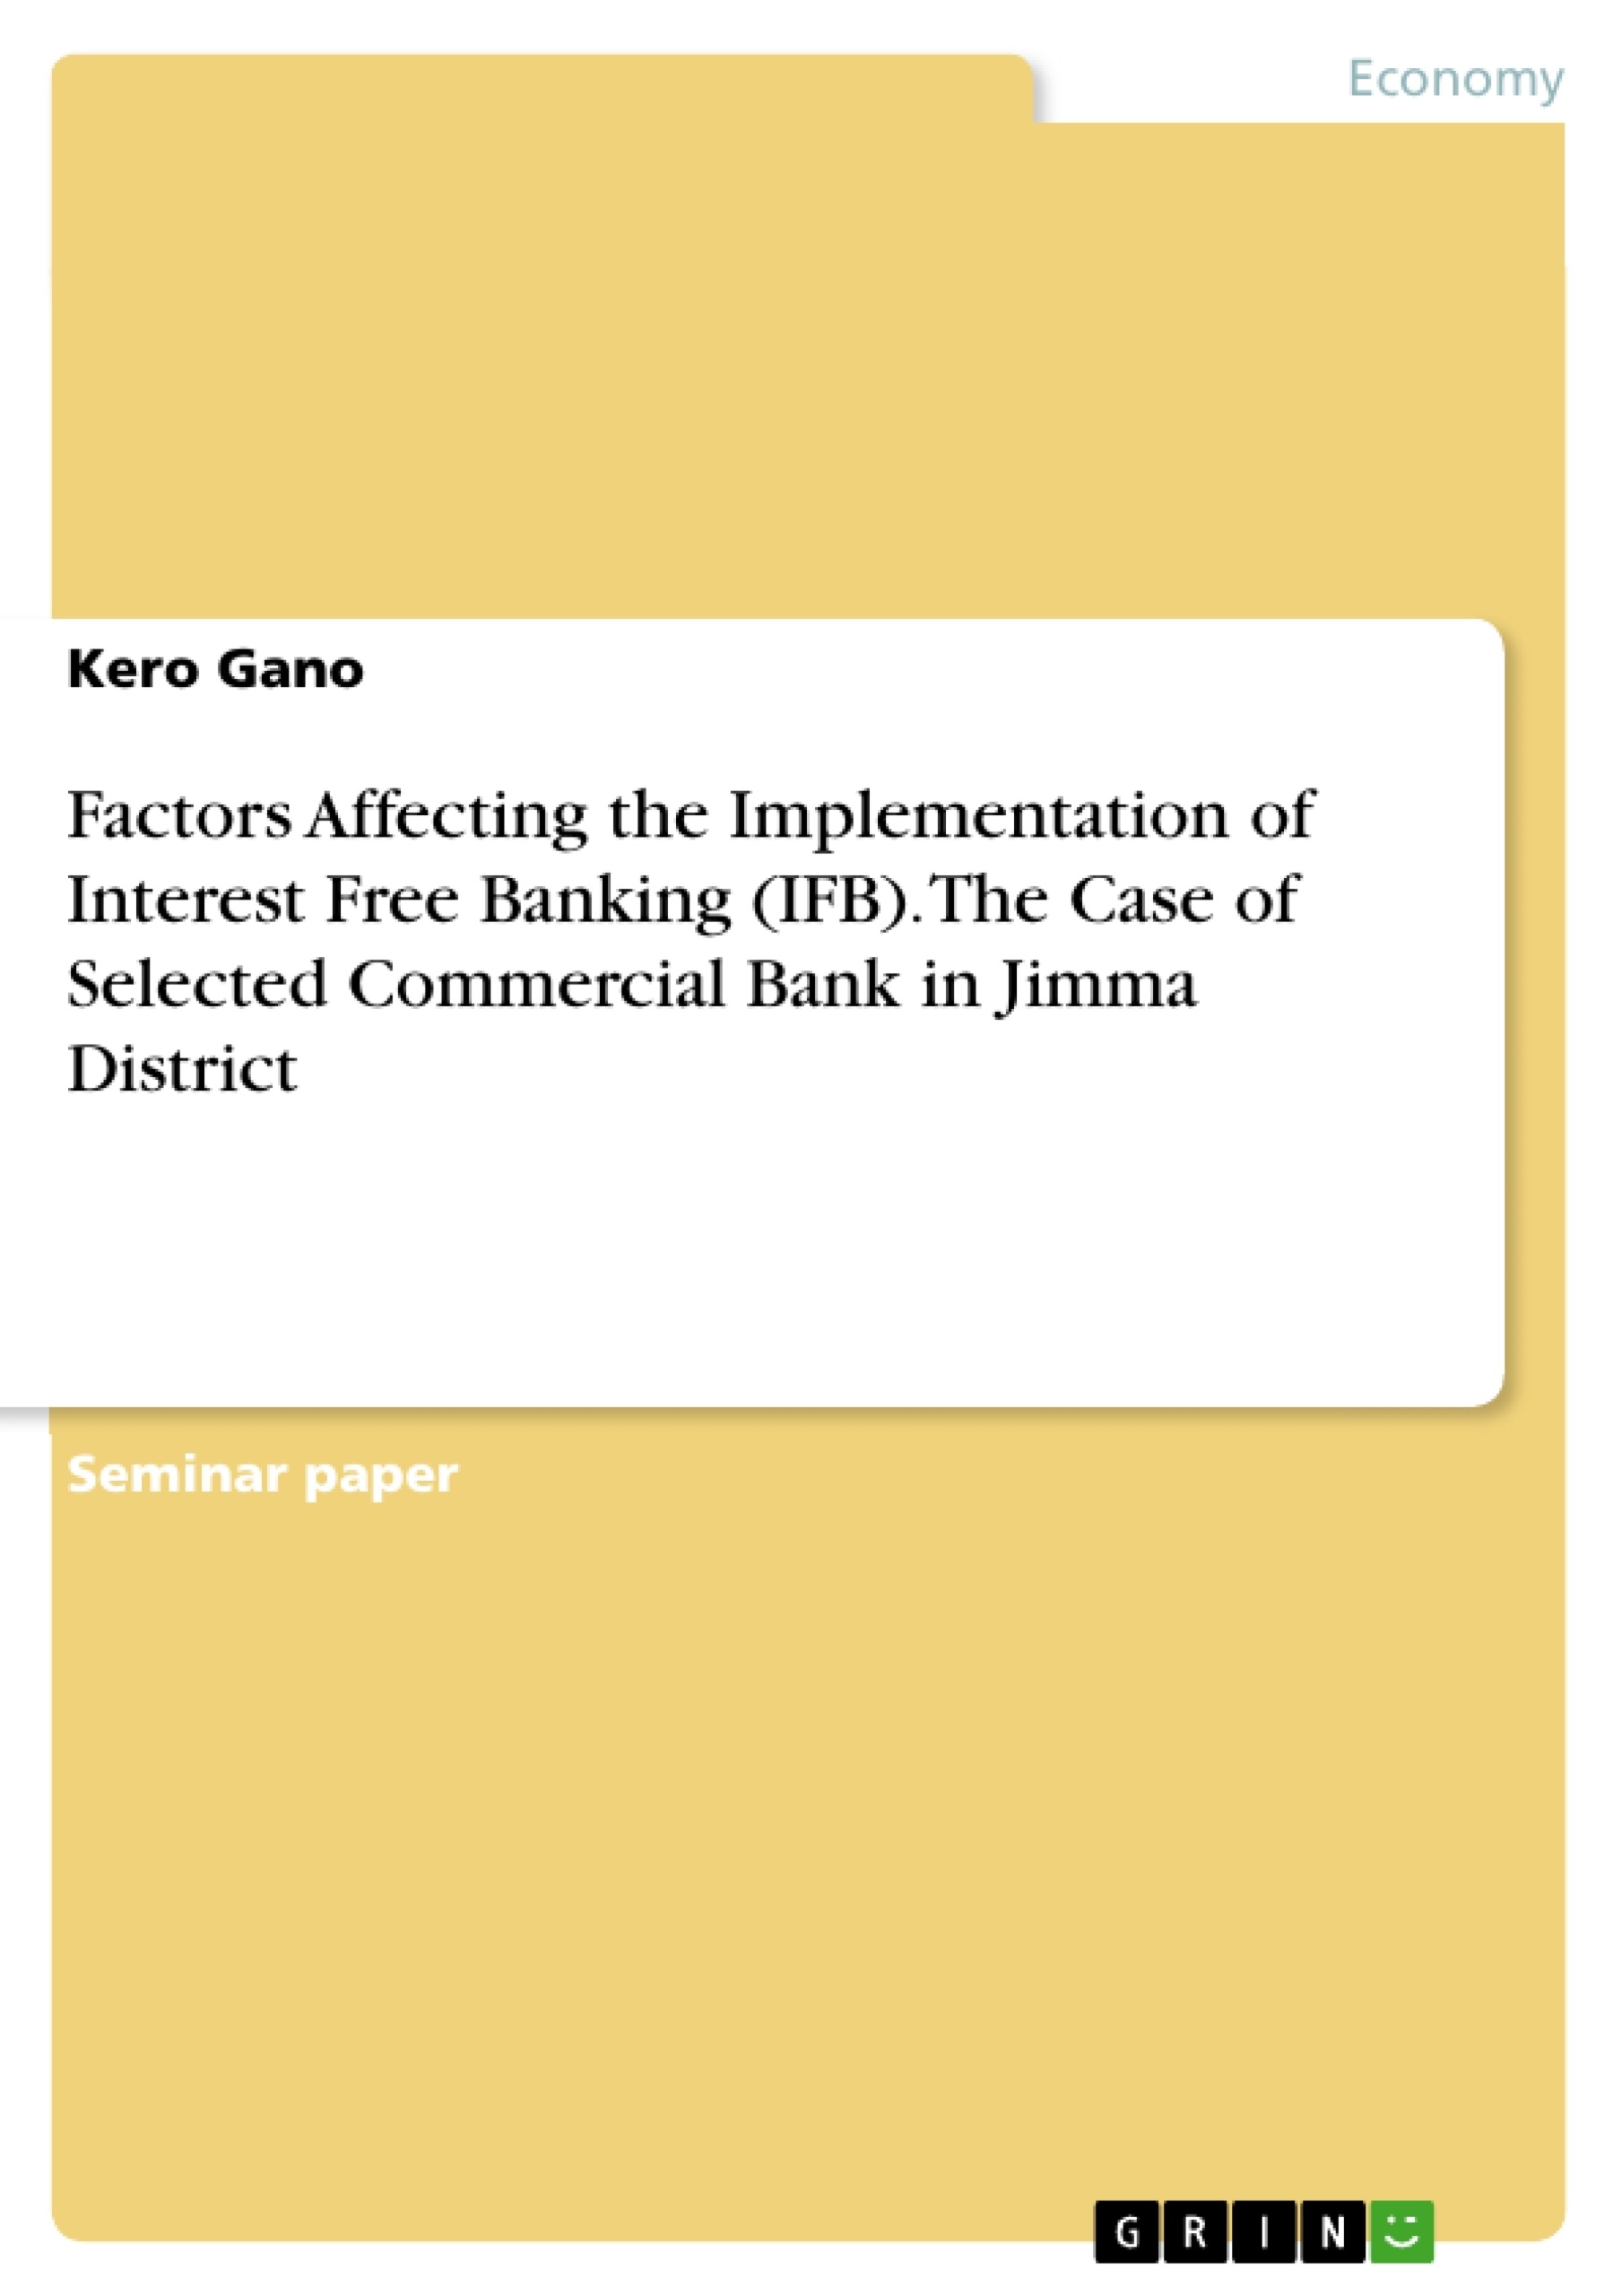 Title: Factors Affecting the Implementation of Interest Free Banking (IFB). The Case of Selected Commercial Bank in Jimma District